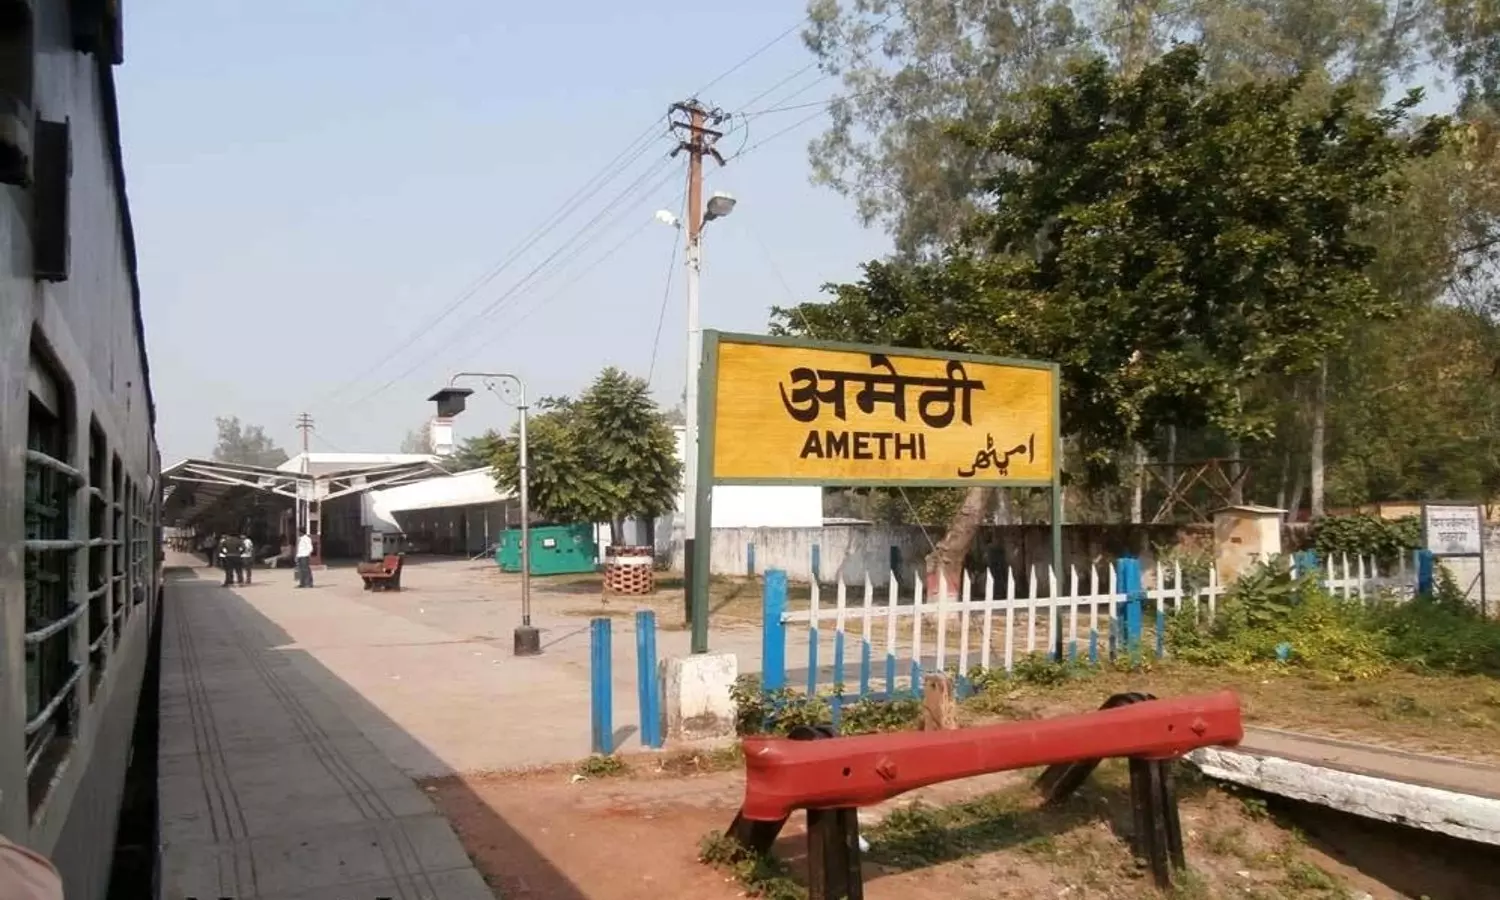 History Of Amethi and Tourist Places